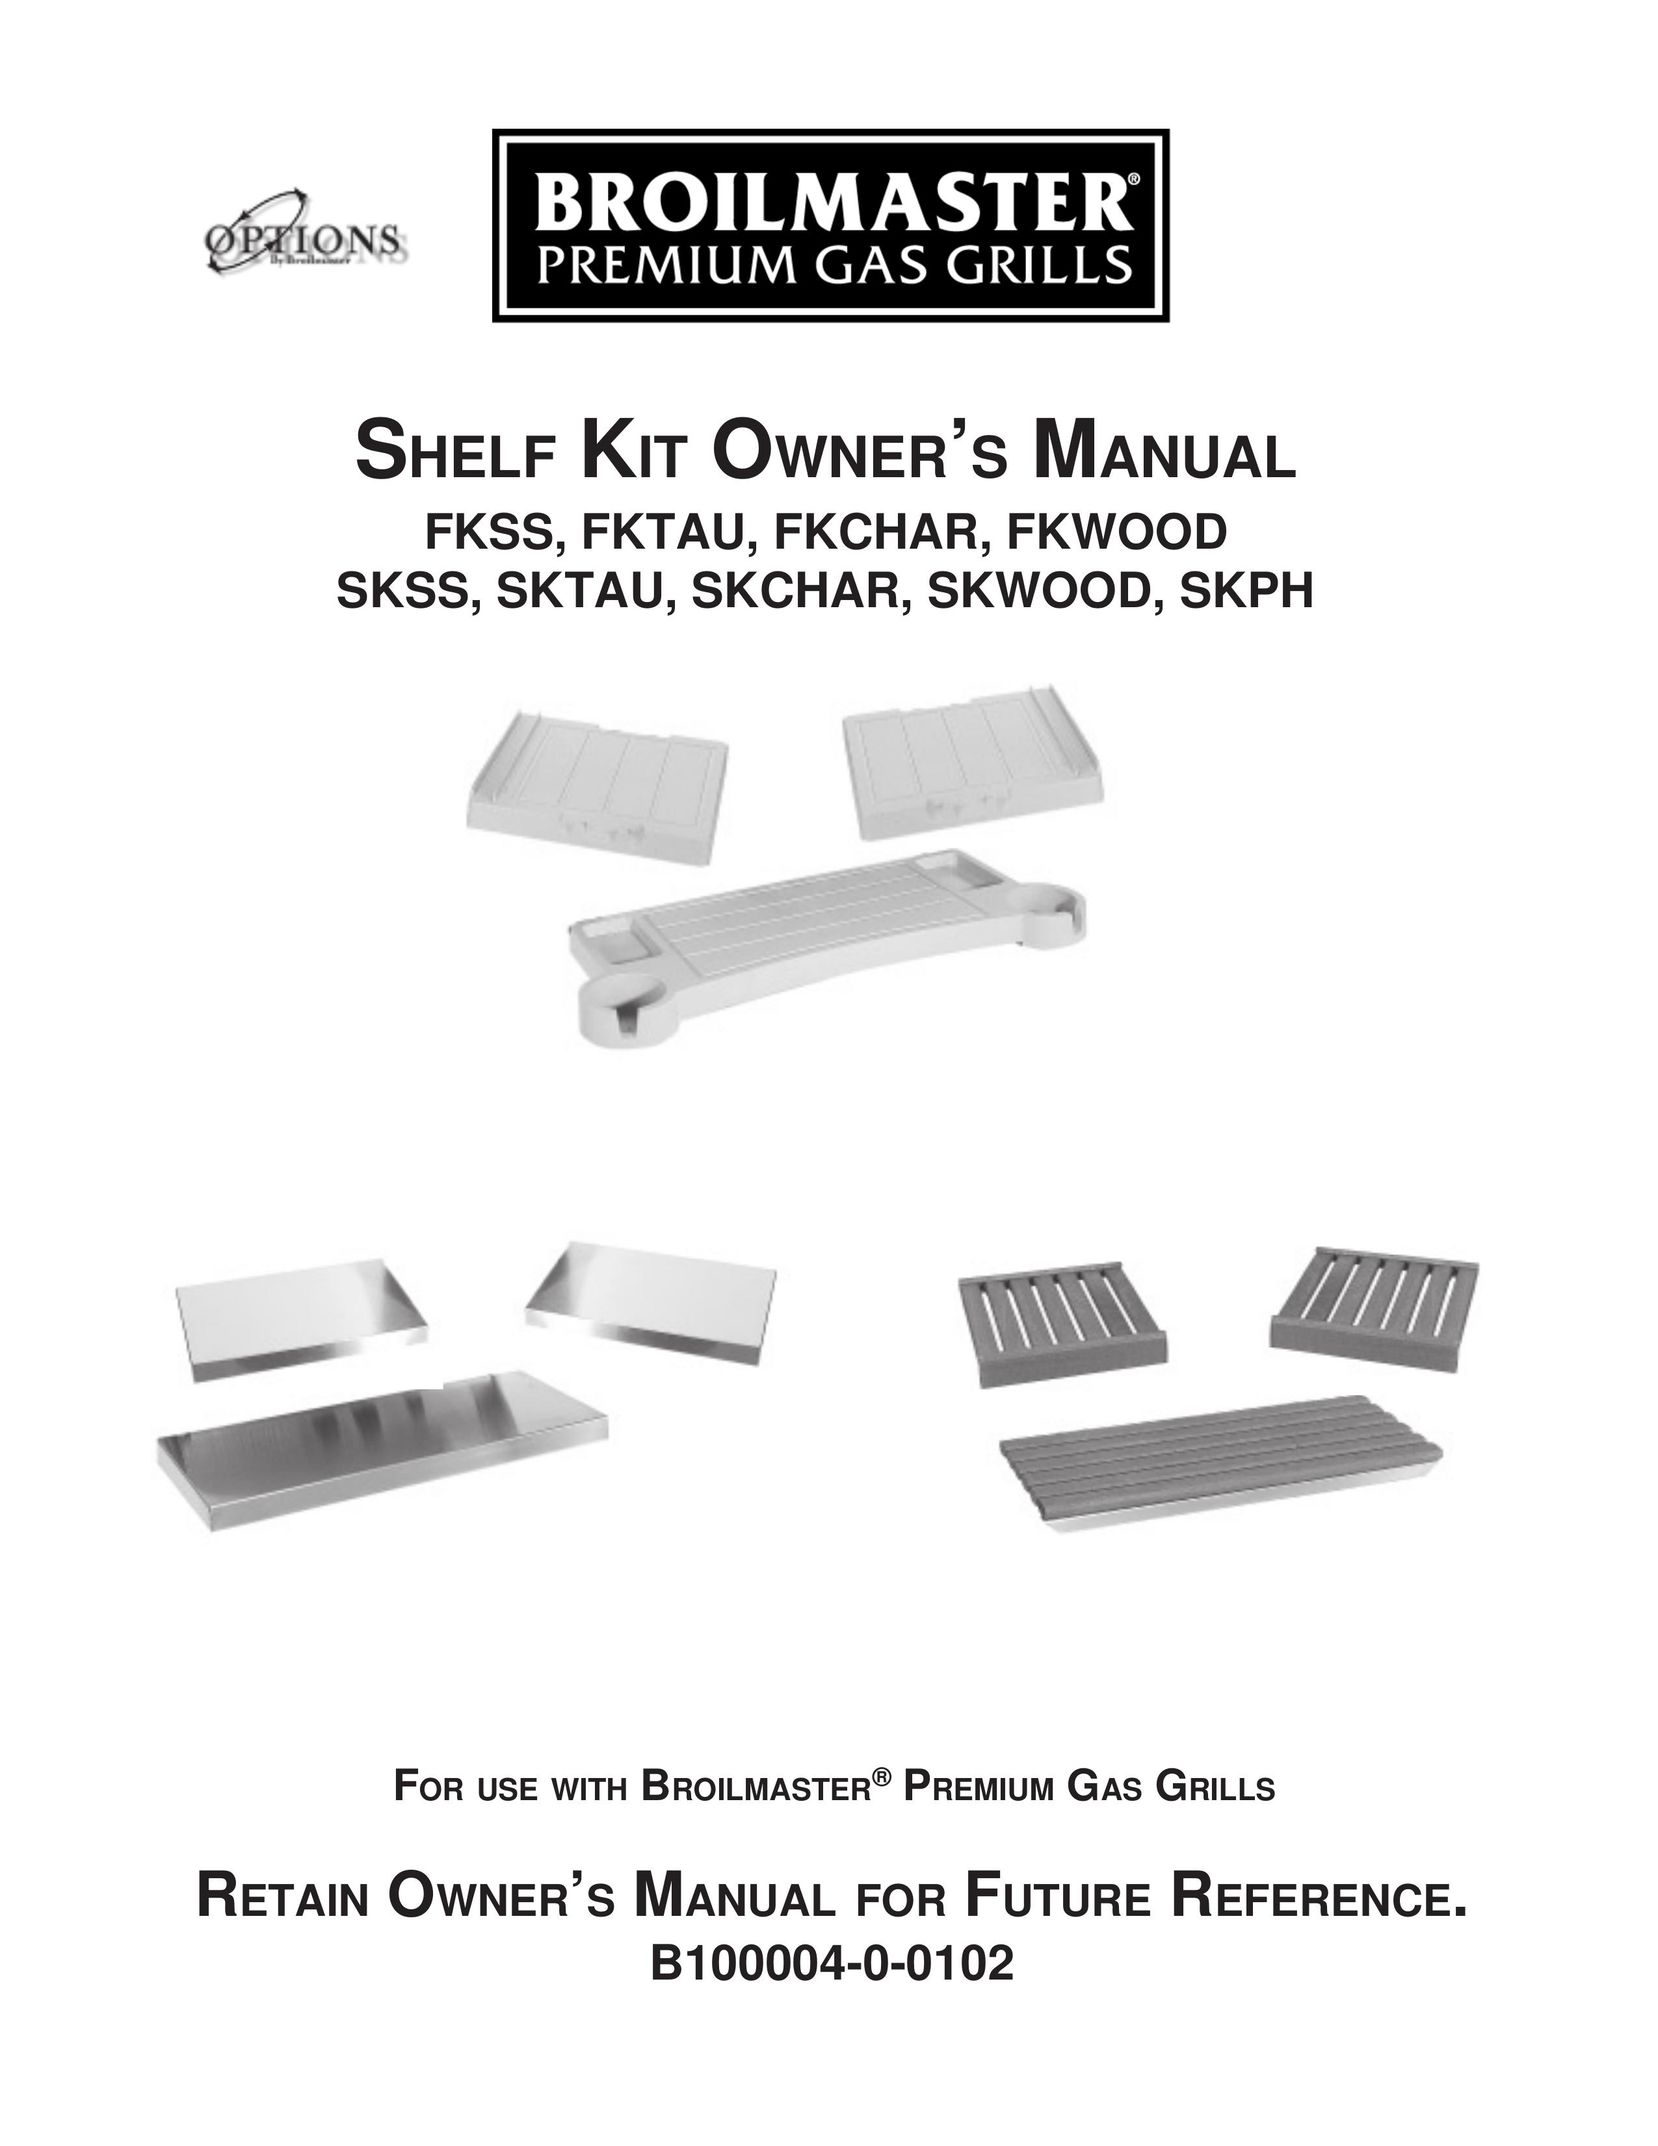 Broilmaster FKSS Kitchen Grill User Manual